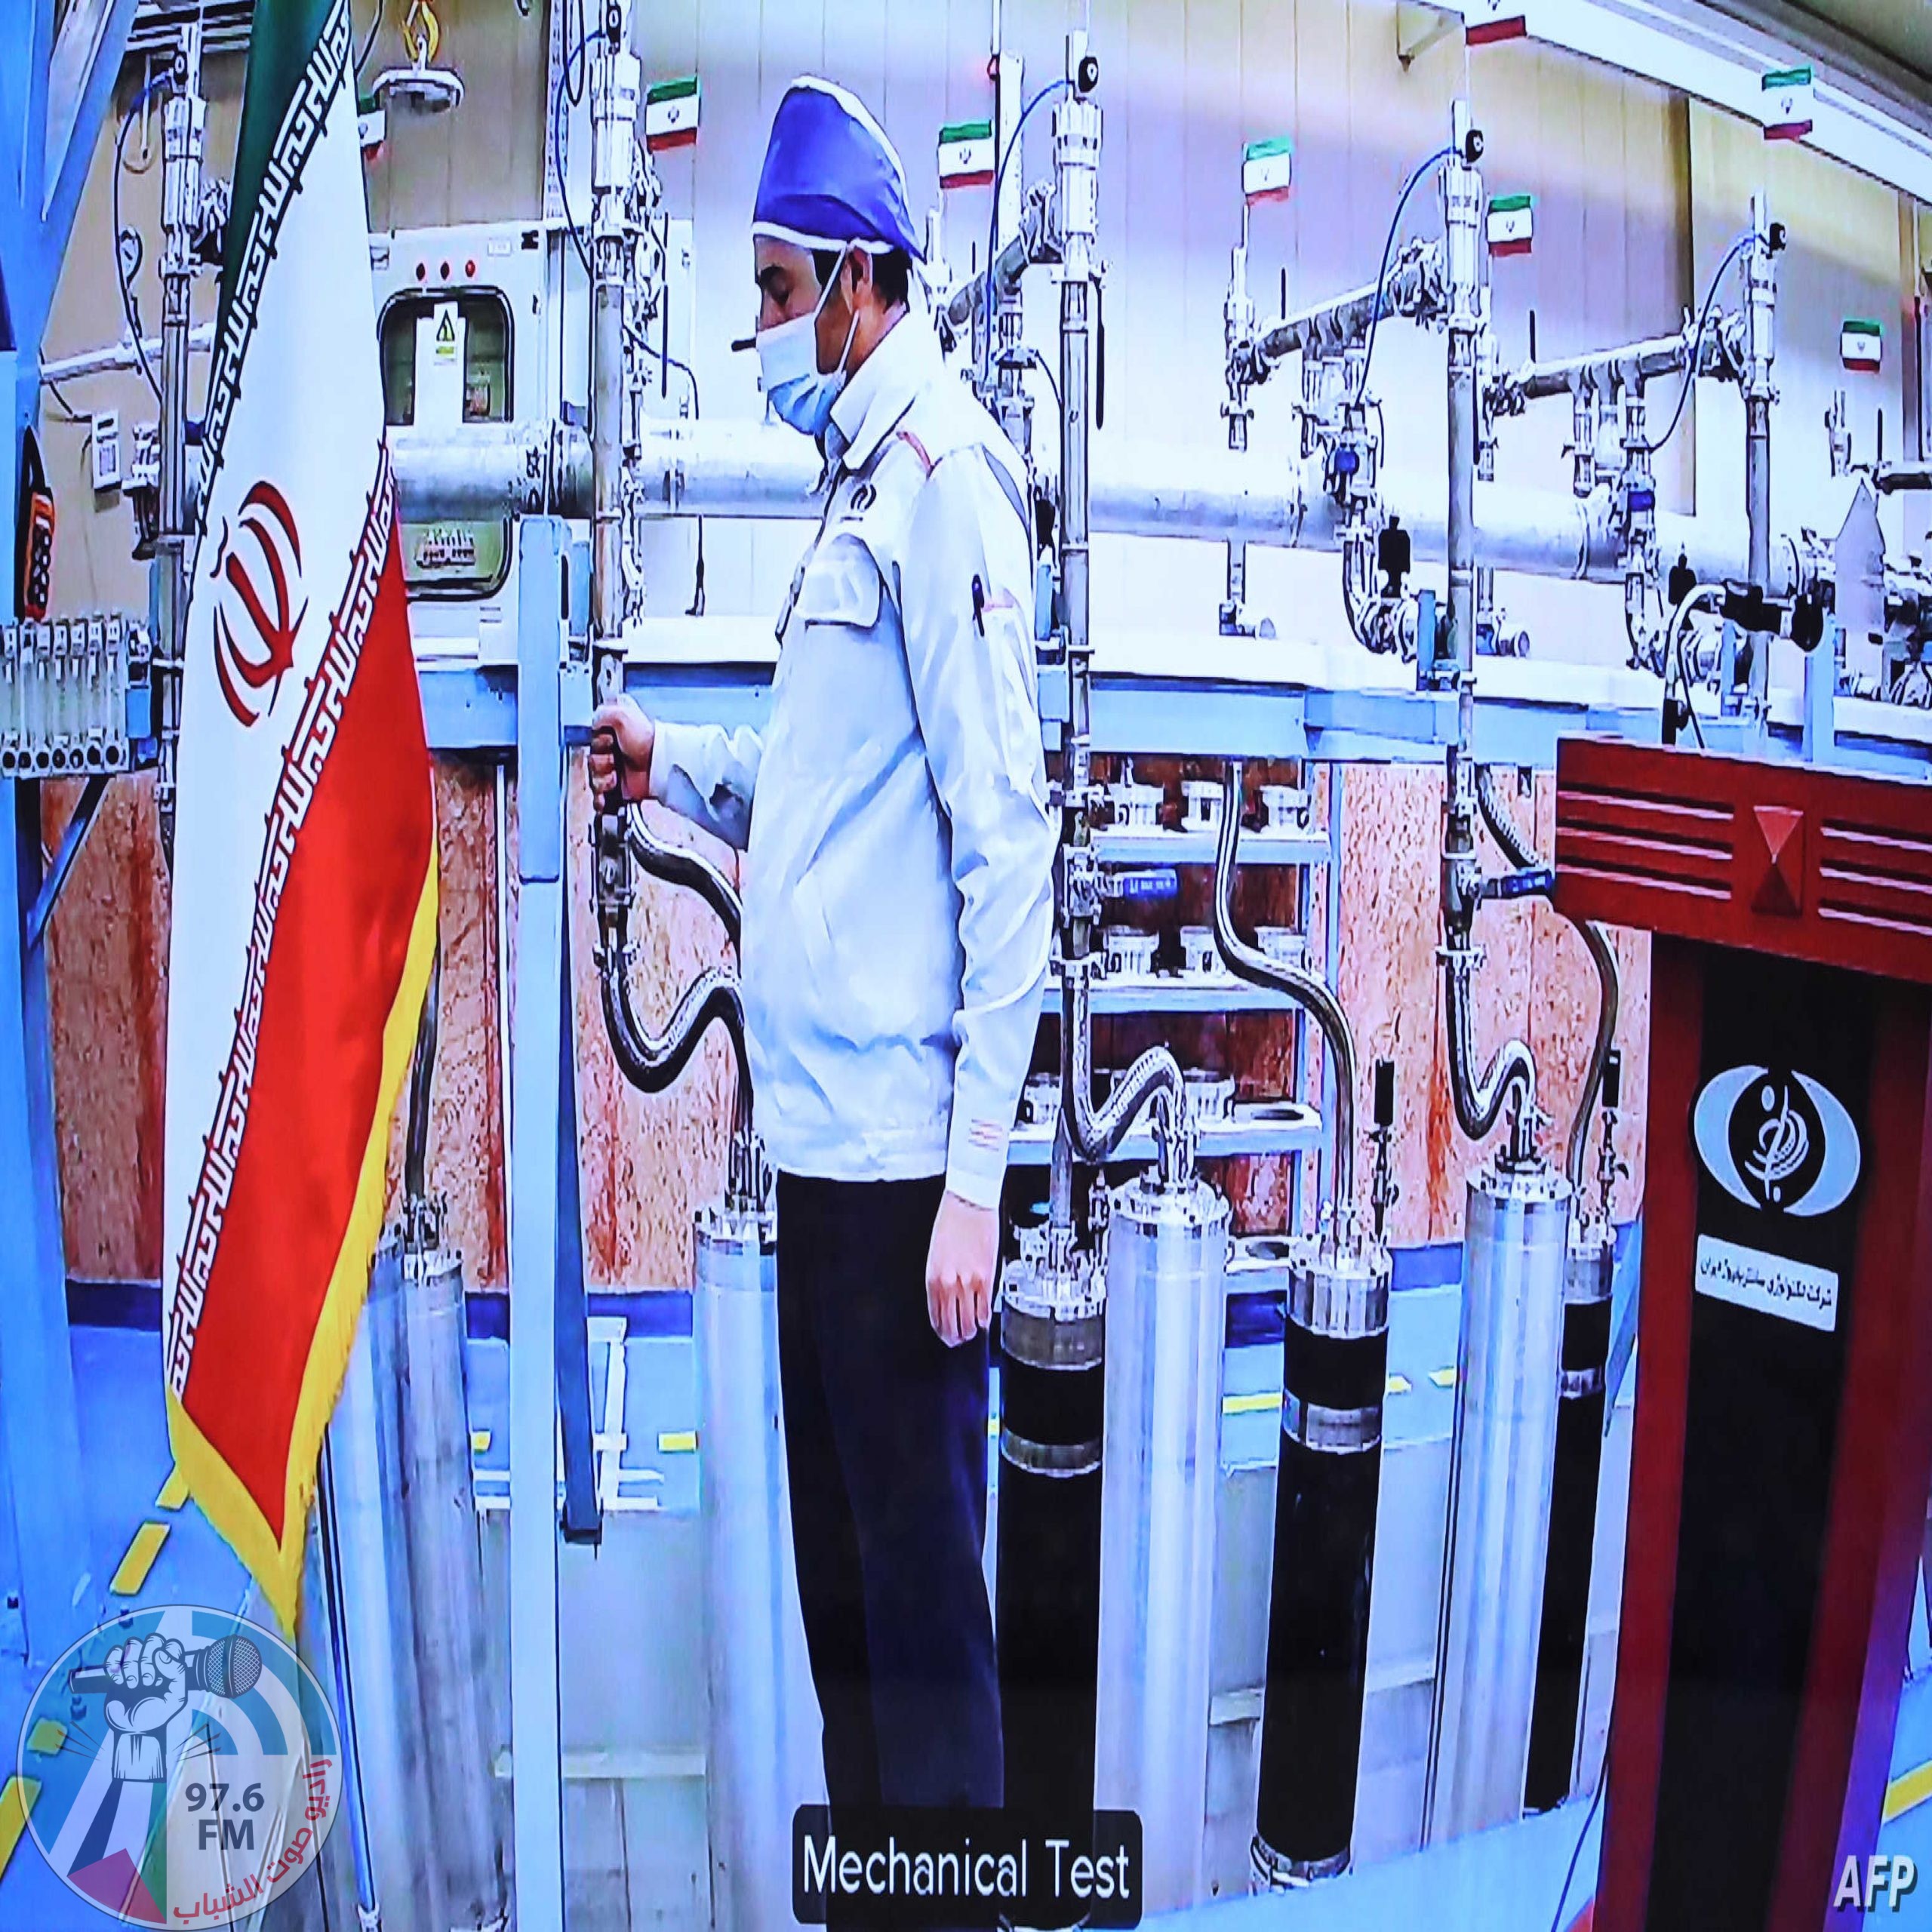 A handout picture provided by the Iranian presidential office on April 10, 2021, shows a grab of a videoconference screen of an enginere inside Iran's Natanz uranium enrichment plant, shown during a ceremony headed by the country's president on Iran's National Nuclear Technology Day, in the capital Tehran. - Iran announced today it has started up advanced uranium enrichment centrifuges in a breach of its undertakings under a troubled 2015 nuclear deal, days after talks on rescuing it got underway.
President Hassan Rouhani officially inaugurated the cascades of 164 IR-6 centrifuges and 30 IR-5 devices at Iran's Natanz uranium enrichment plant in a ceremony broadcast by state television. (Photo by - / Iranian Presidency / AFP) / === RESTRICTED TO EDITORIAL USE - MANDATORY CREDIT "AFP PHOTO / HO / IRANIAN PRESIDENCY" - NO MARKETING NO ADVERTISING CAMPAIGNS - DISTRIBUTED AS A SERVICE TO CLIENTS ===